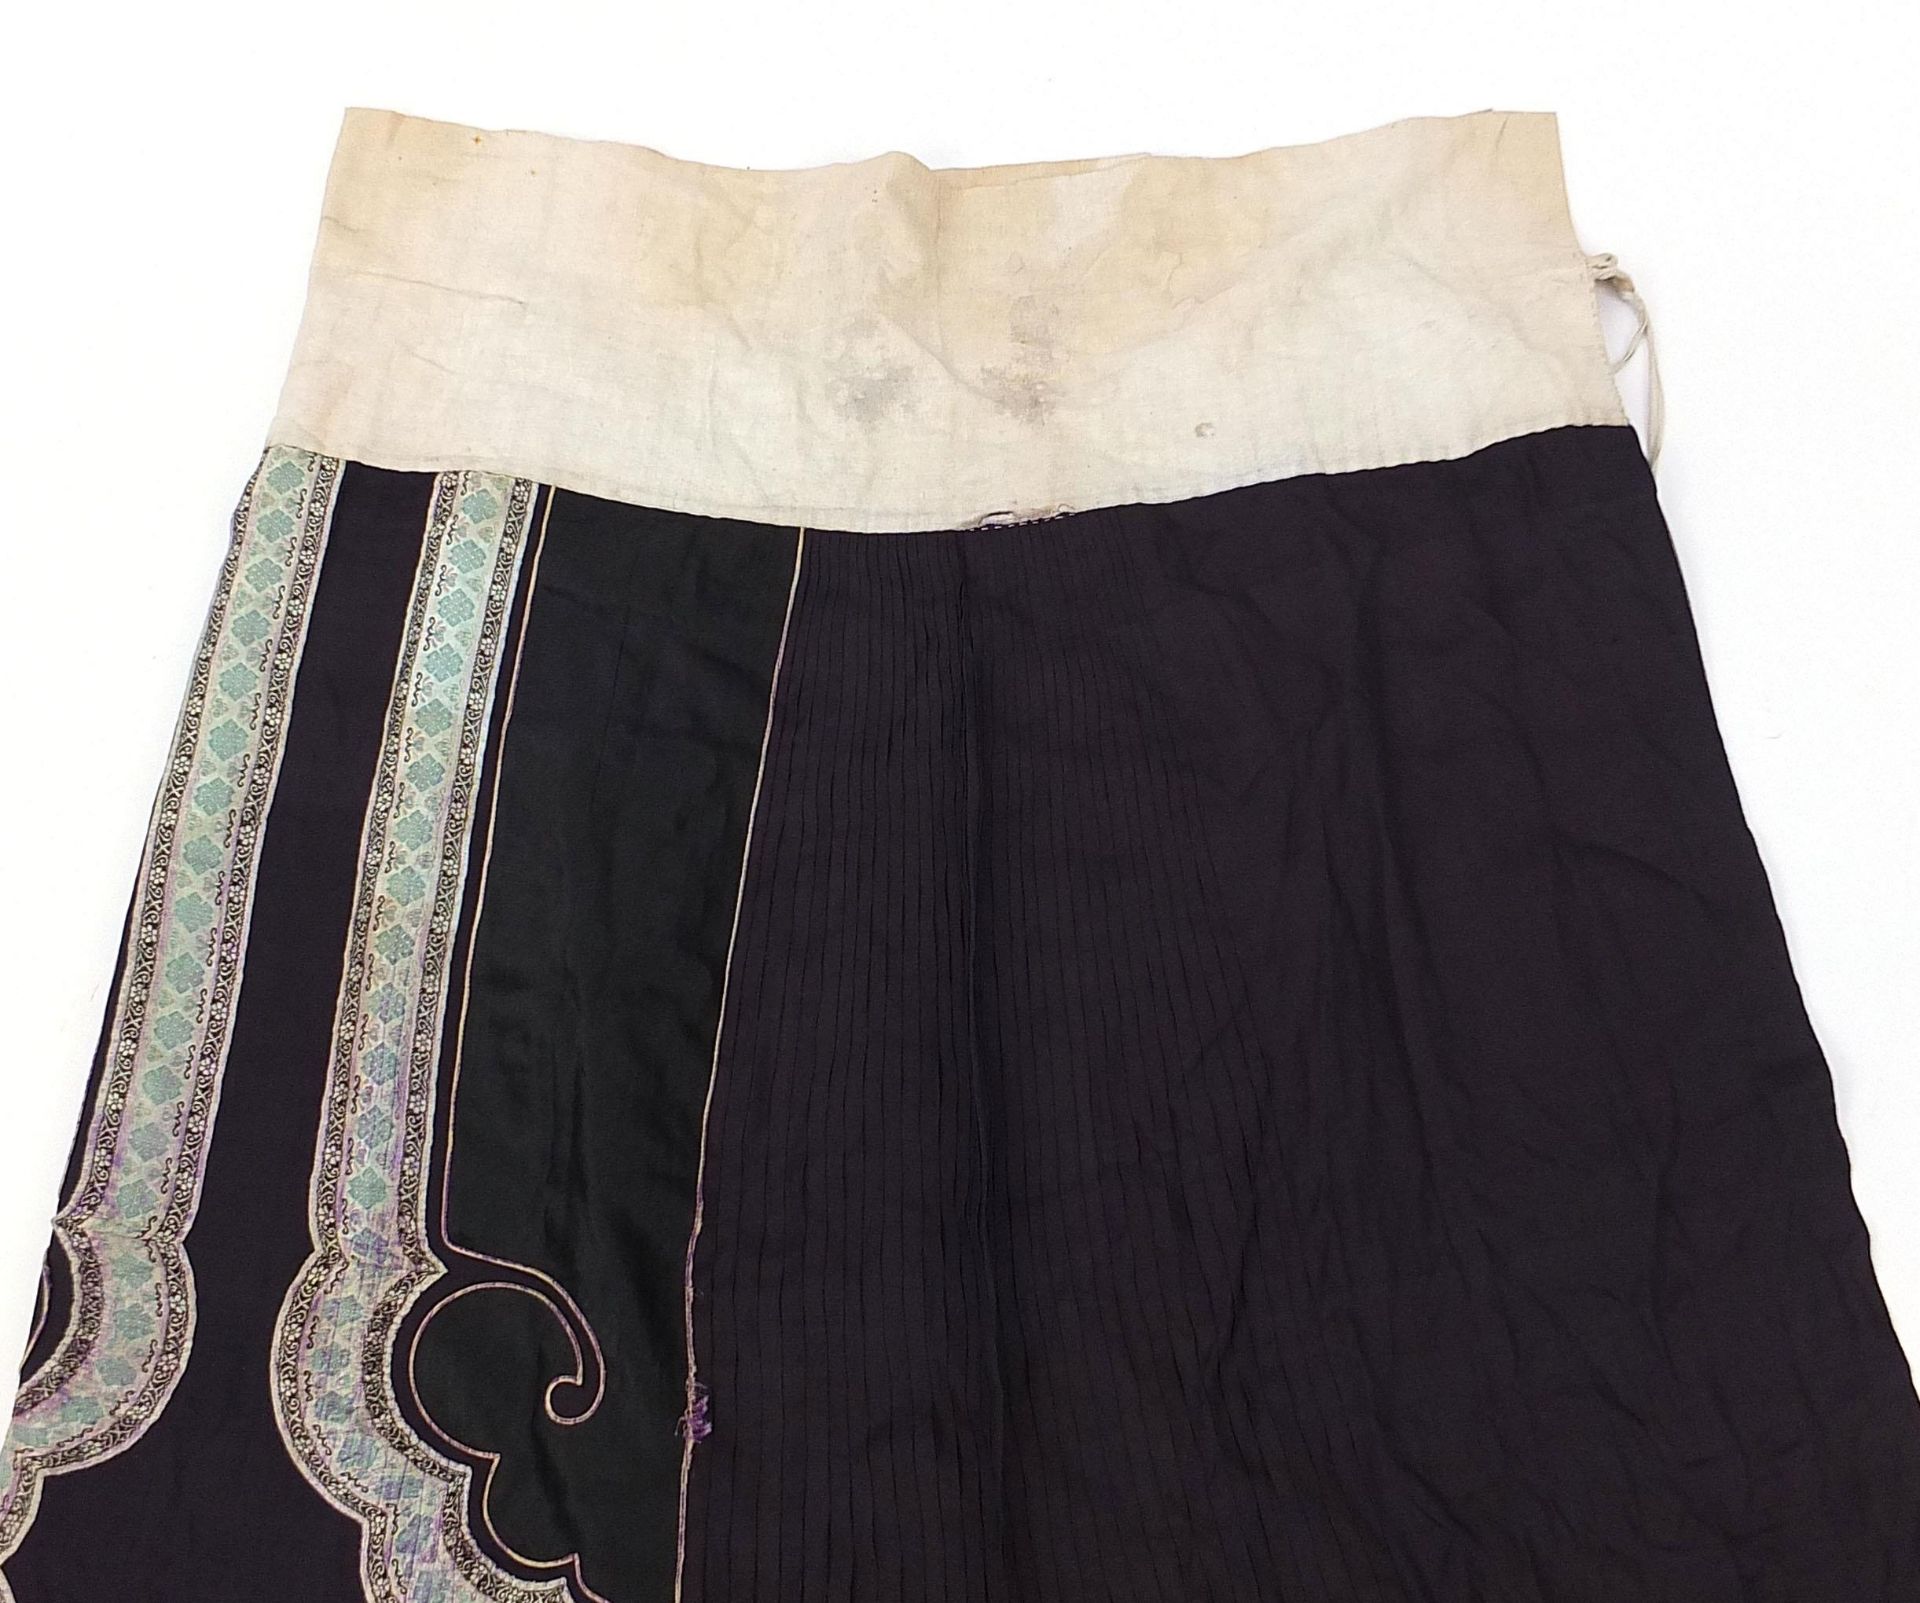 Chinese silk embroidered skirt with floral motifs, 98cm high - Image 7 of 9